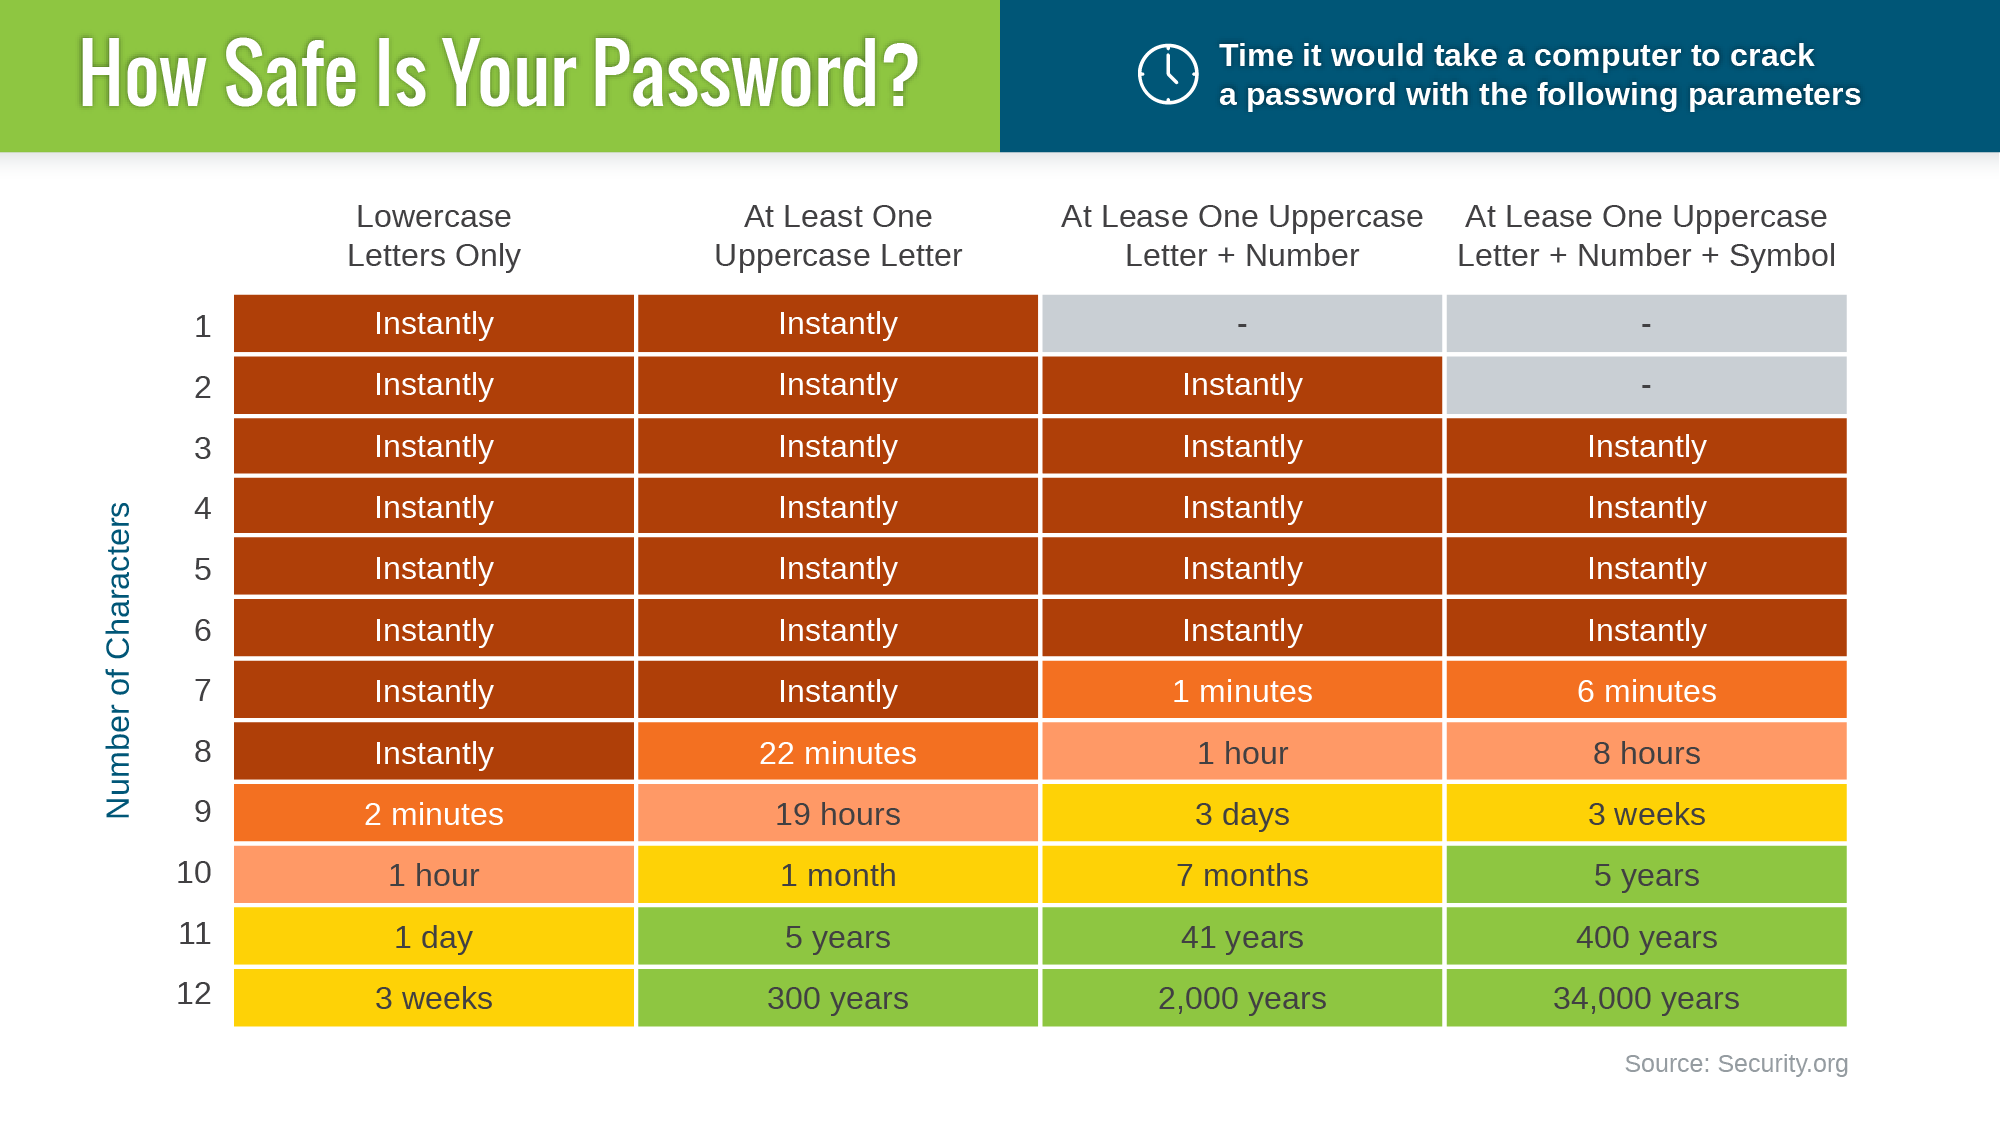 How Safe Is Your Password?